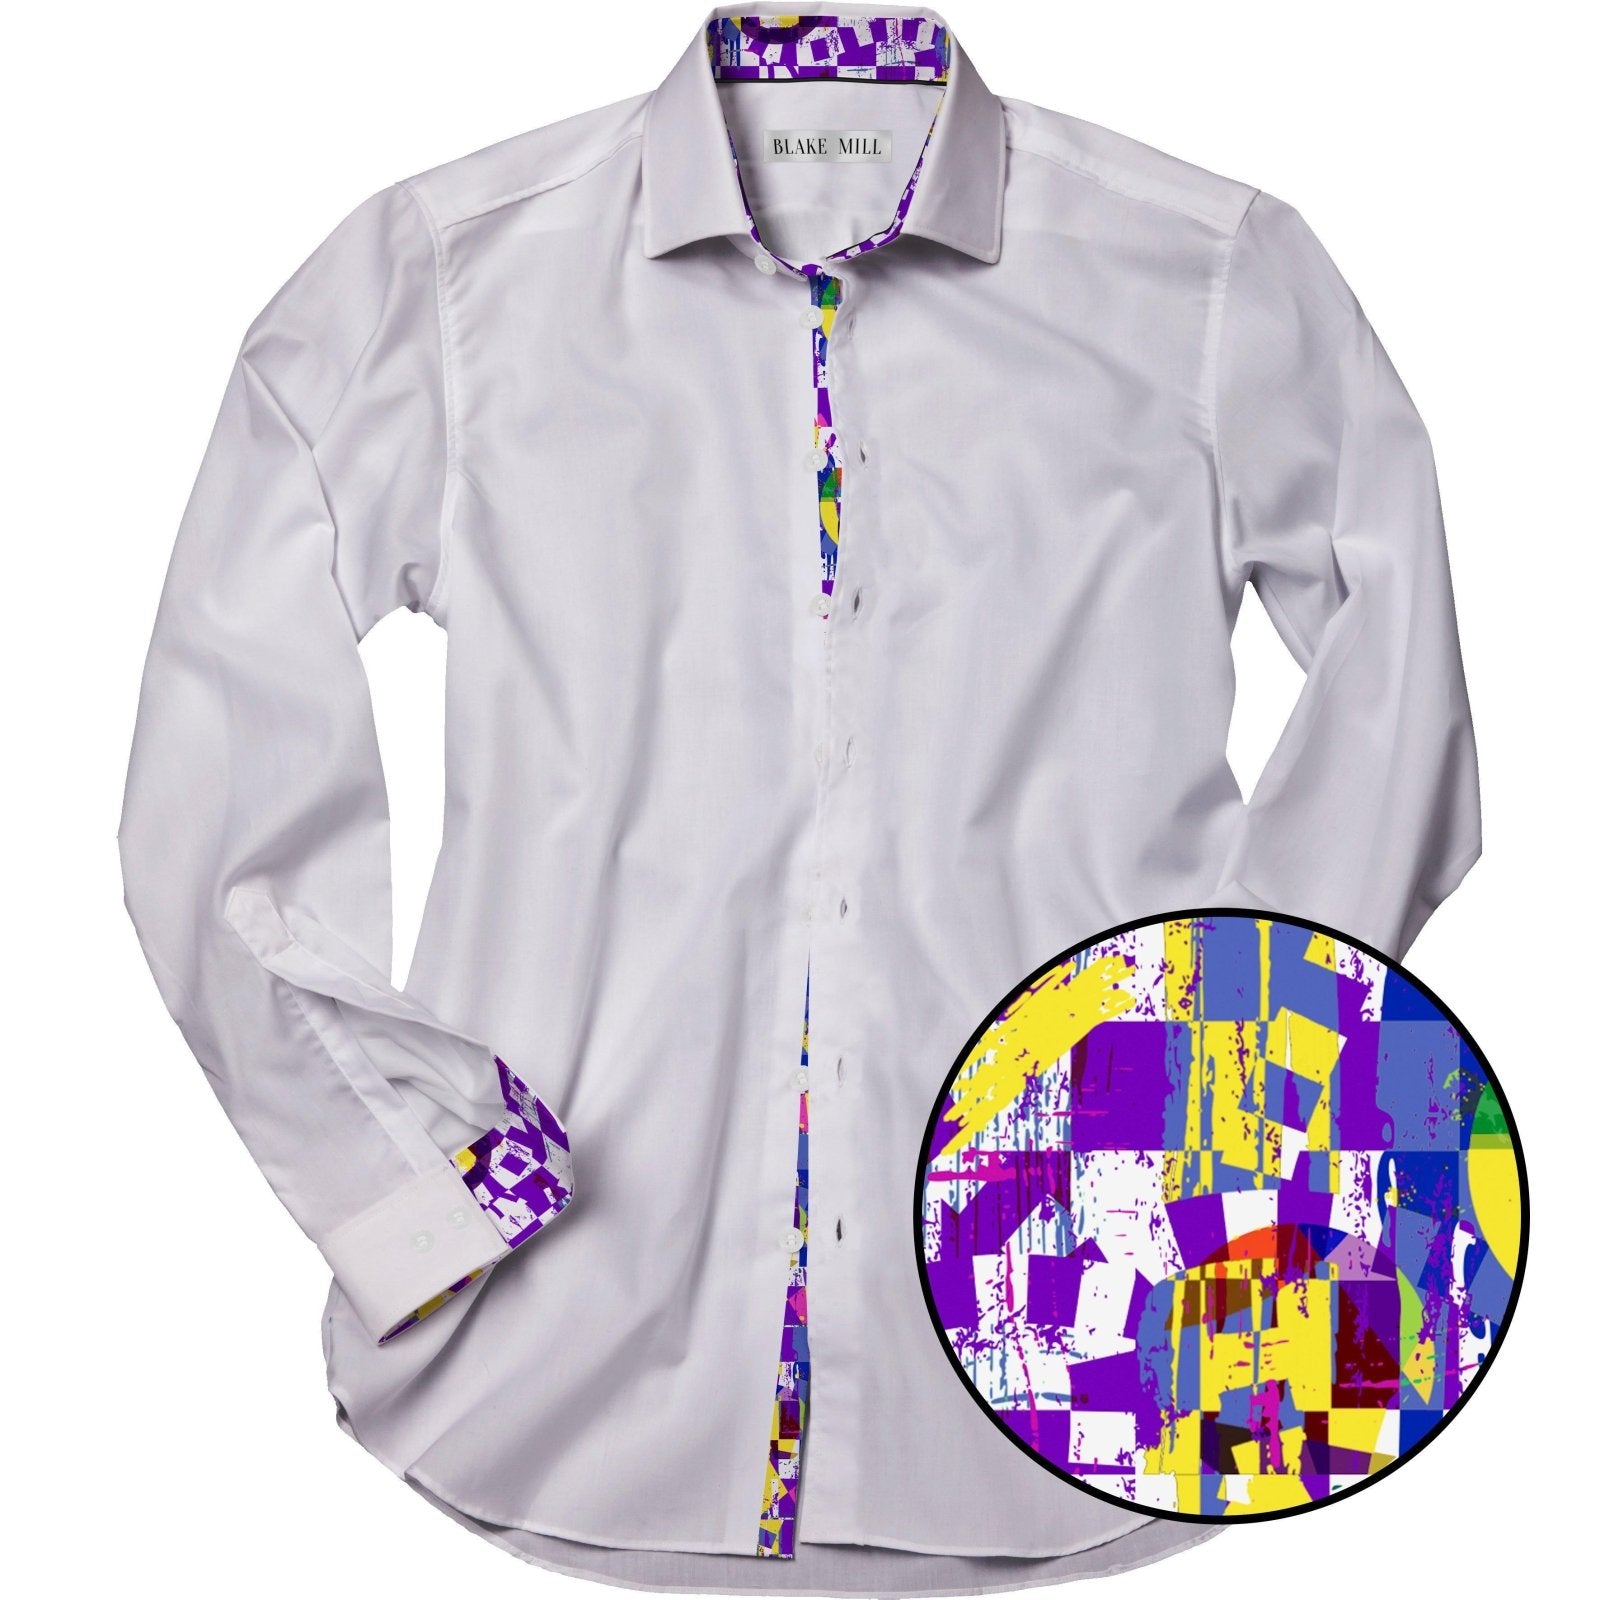 White with Abstract Purple Accents Shirt - Blake Mill